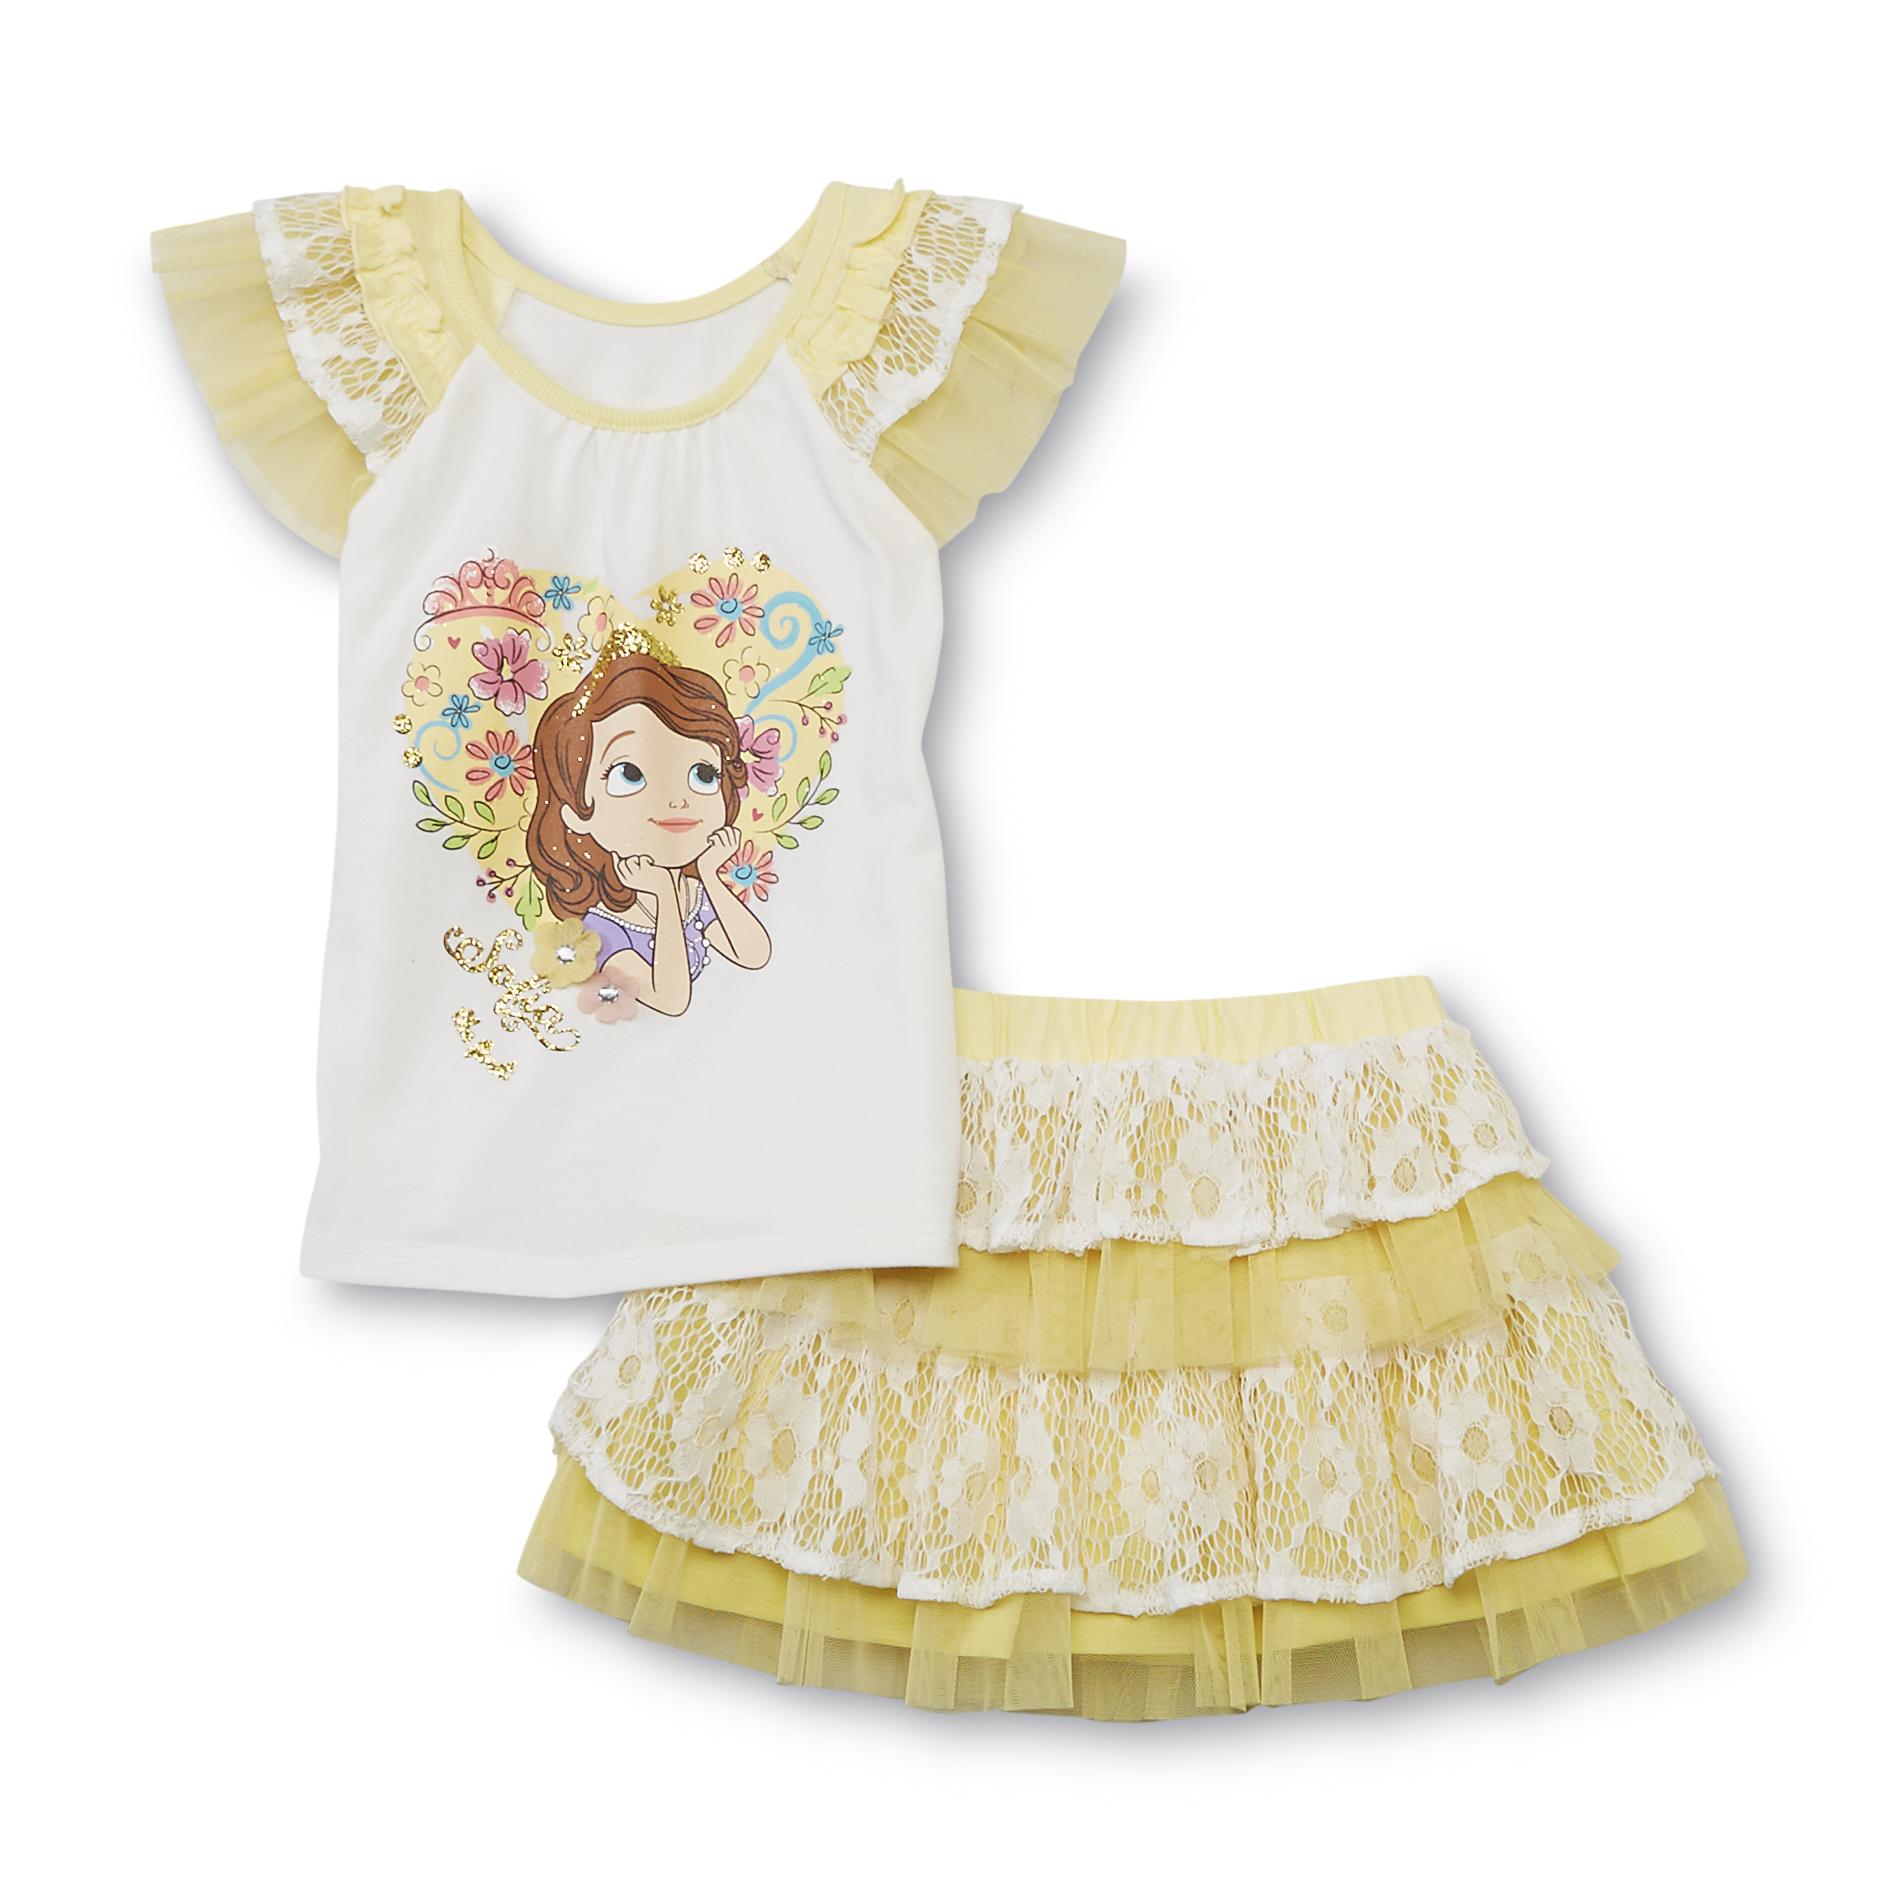 Disney Sofia the First Toddler Girl's Top & Scooter Skirt